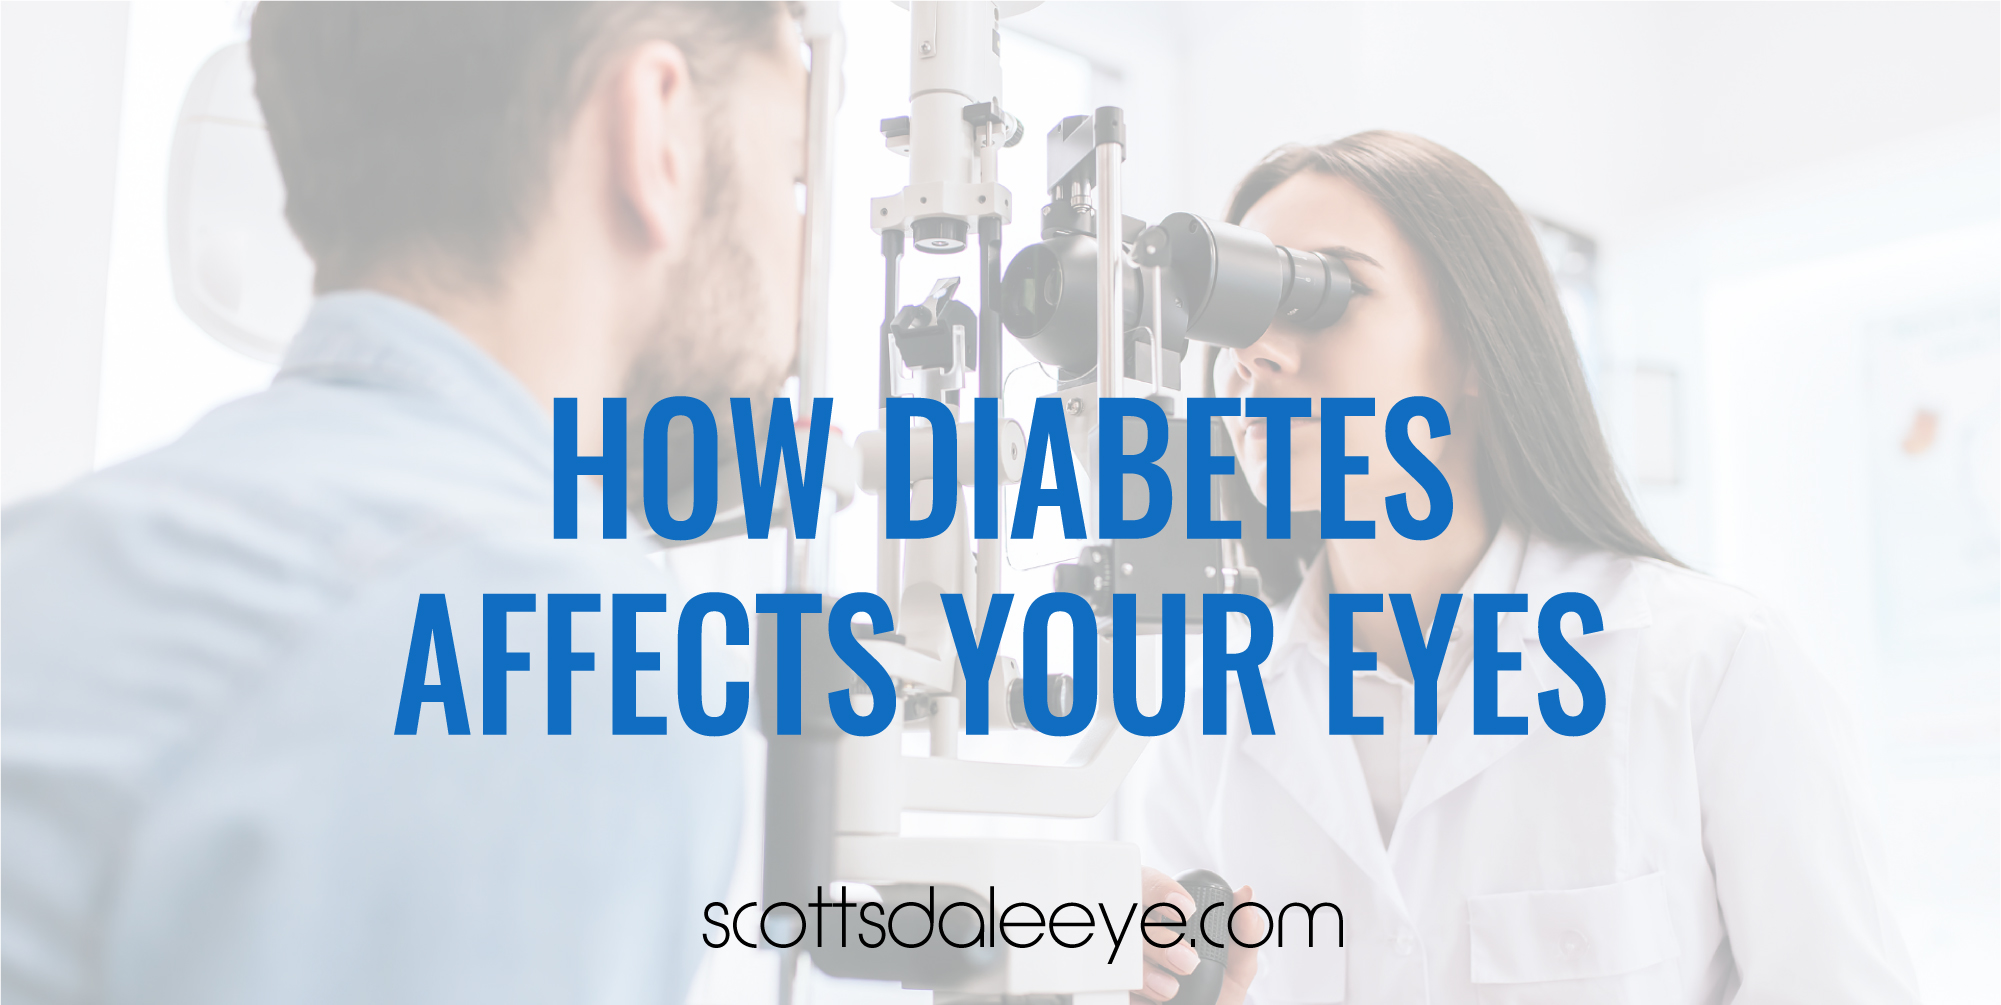 How Diabetes Affects Your Eyes